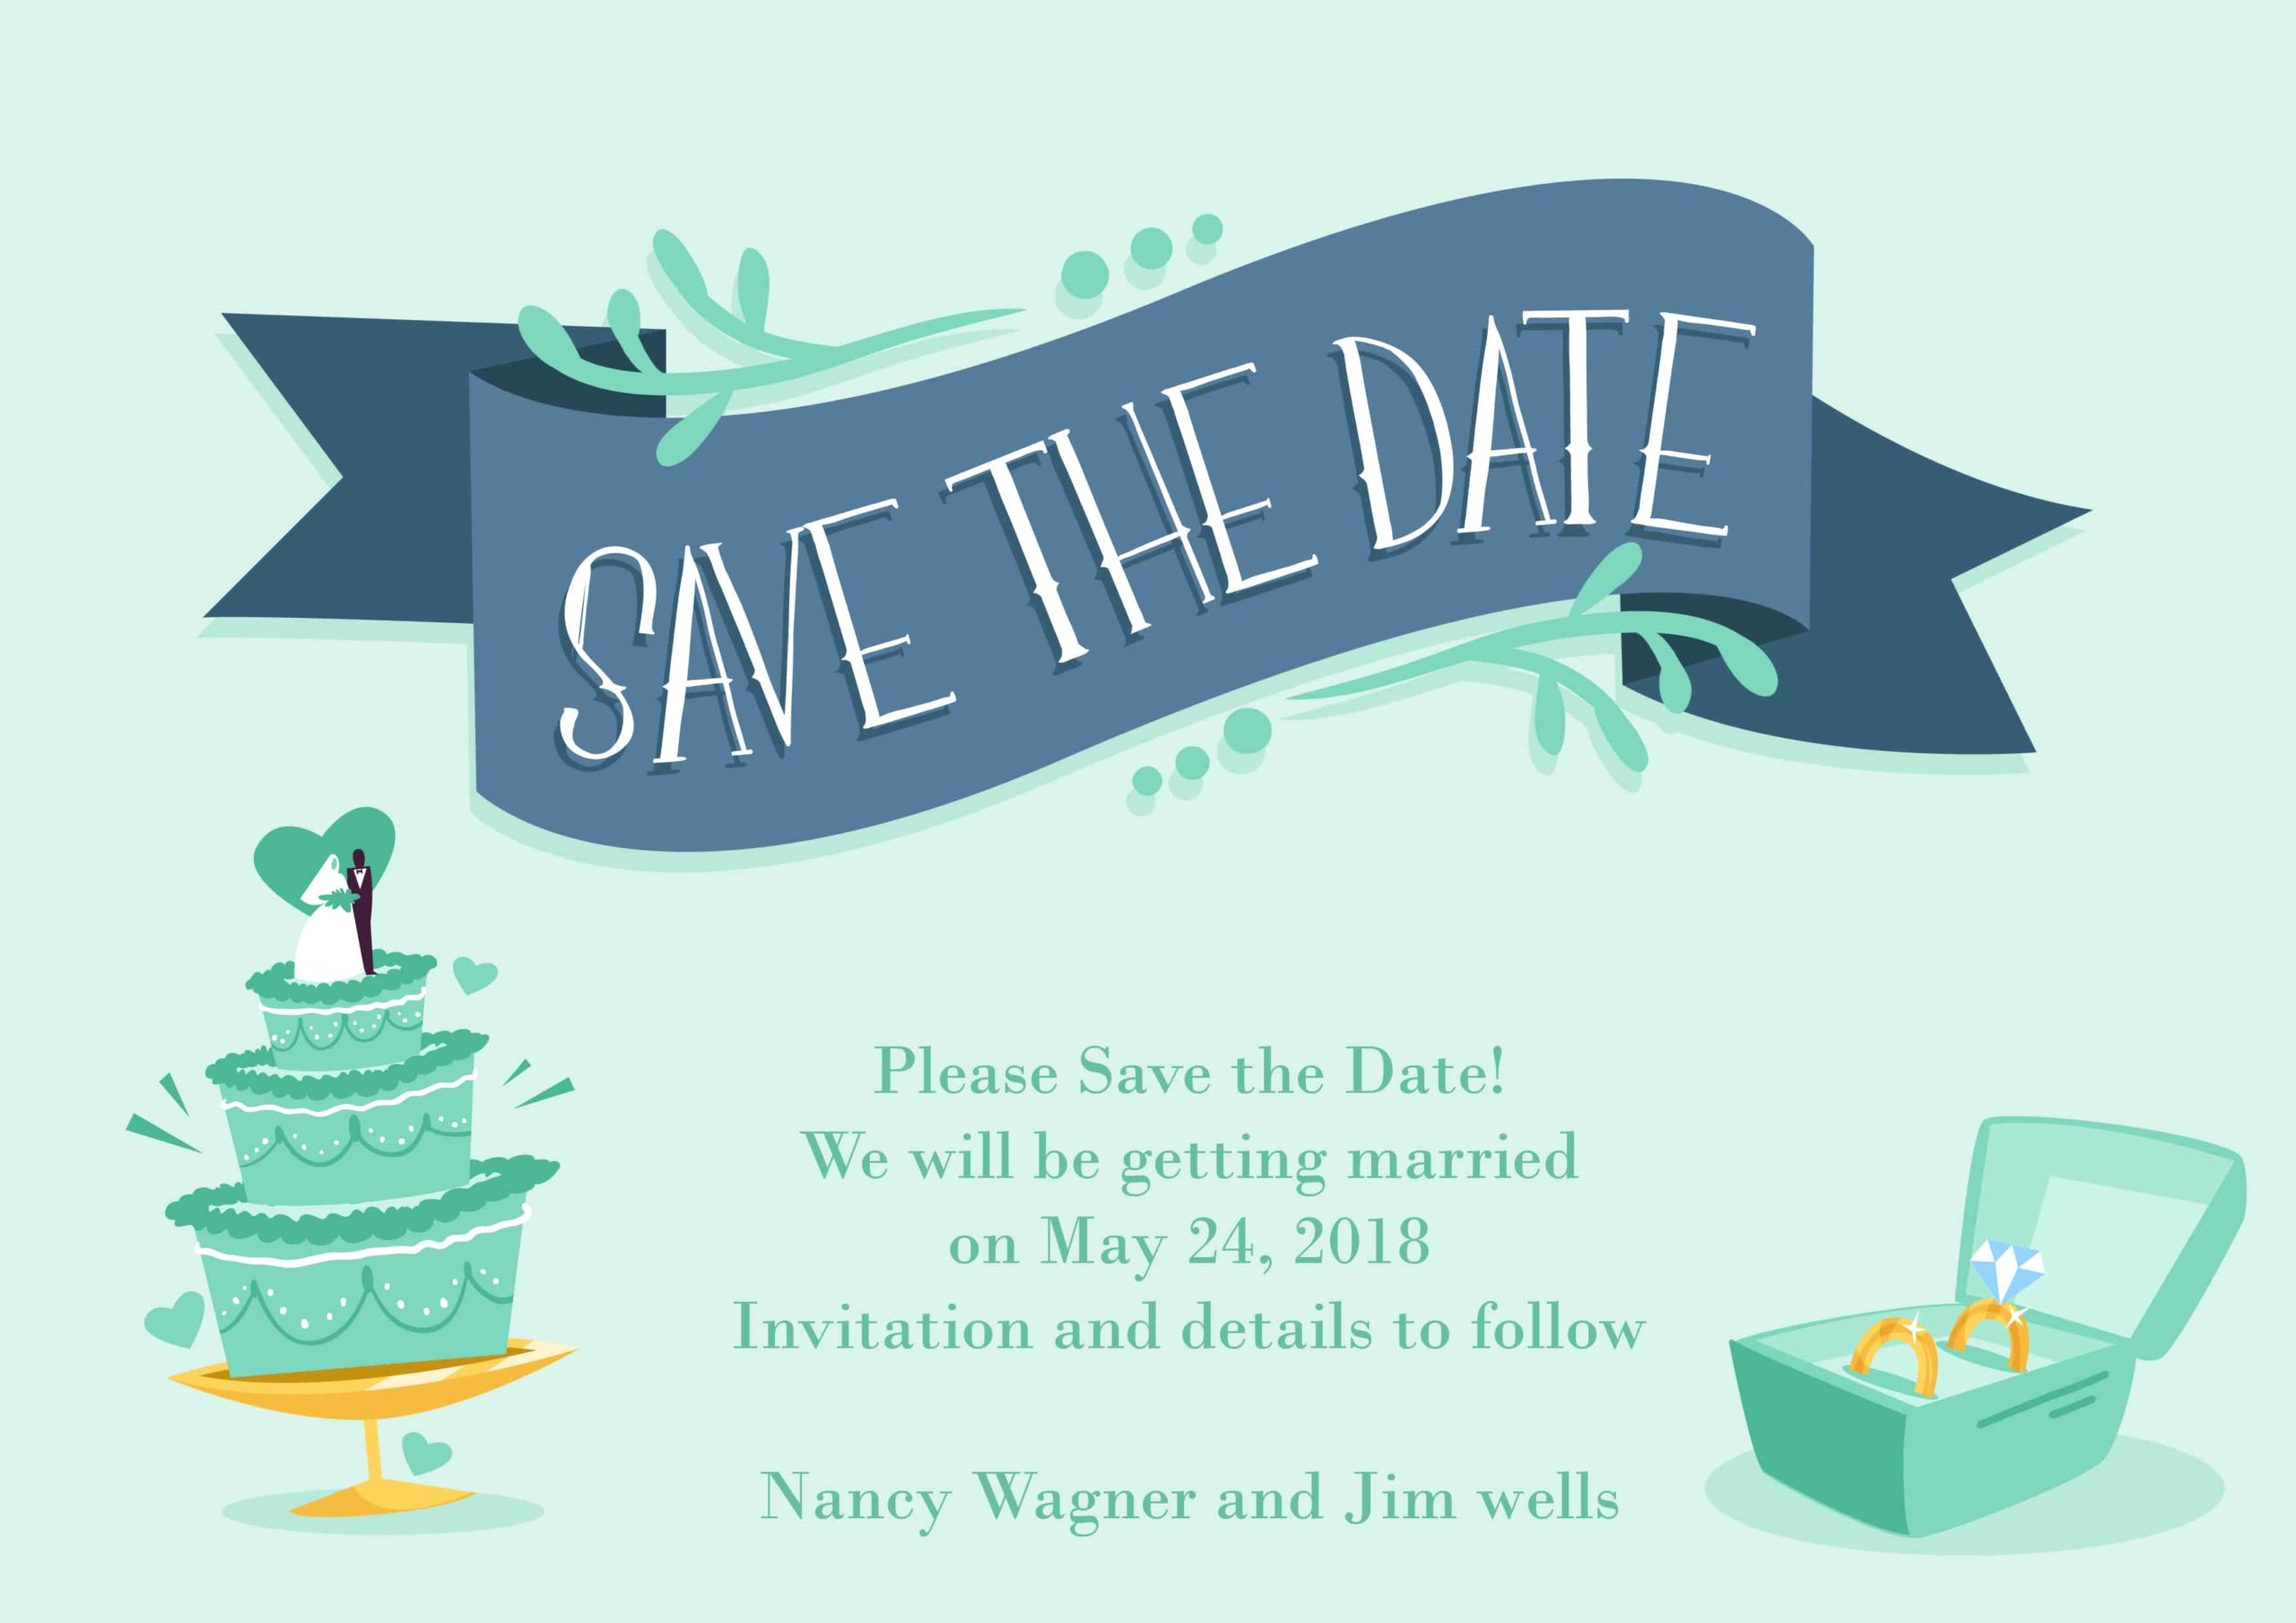 Buy Date Vector Image: Save The Date Vector Image Invitation Template